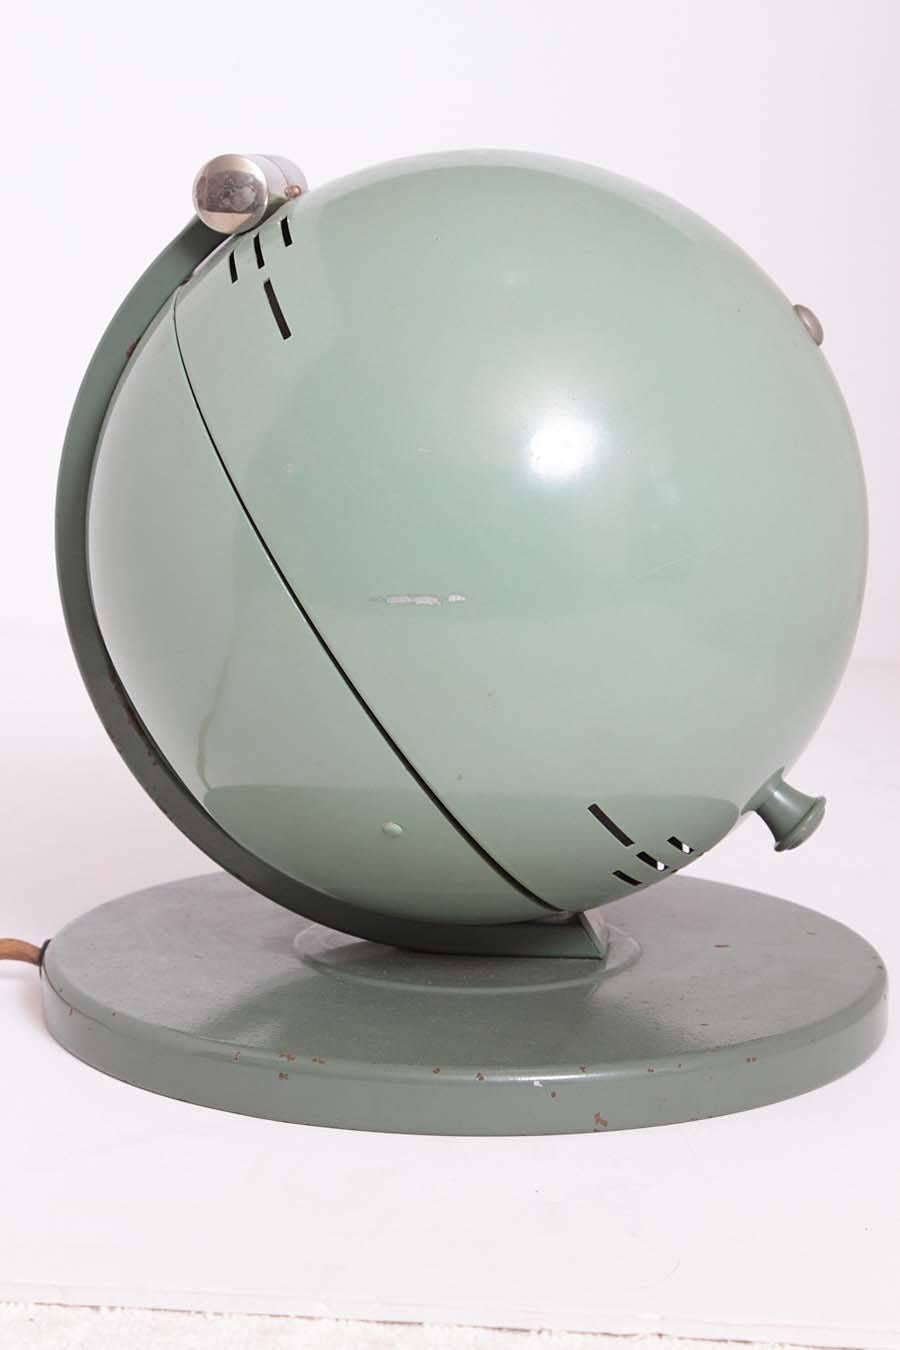 Great early modernist design on this German machine age Classic.

Two-tone Art Deco green lacquered metal with aluminium internal bulb reflector and base mirror. Heavy duty vintage or original silk-wrapped cord and European bakelite